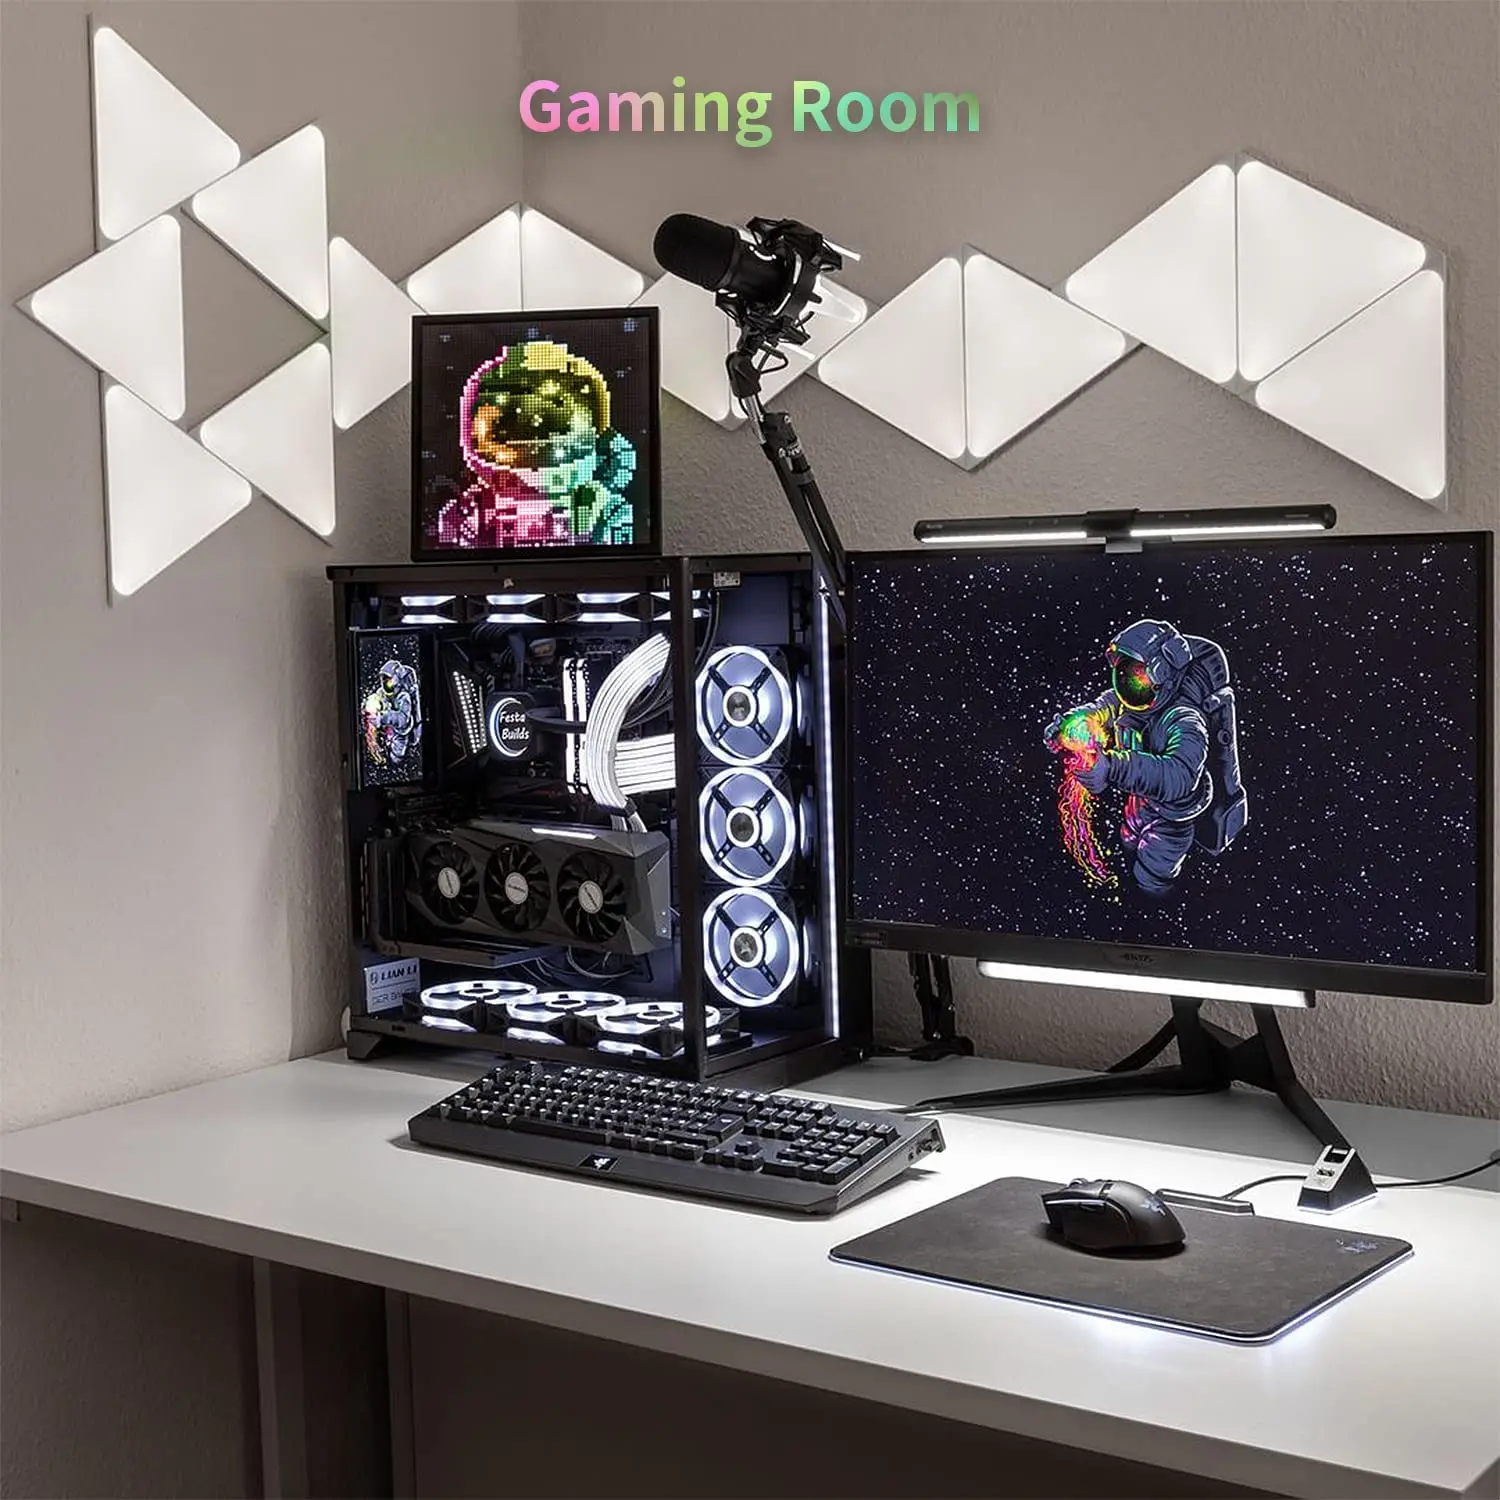 Divoom Pixoo 64 WiFi Pixel Art Display WiFi Cloud Digital Frame with APP Control,64 X 64 LED Panel  for Gaming Room Decoration